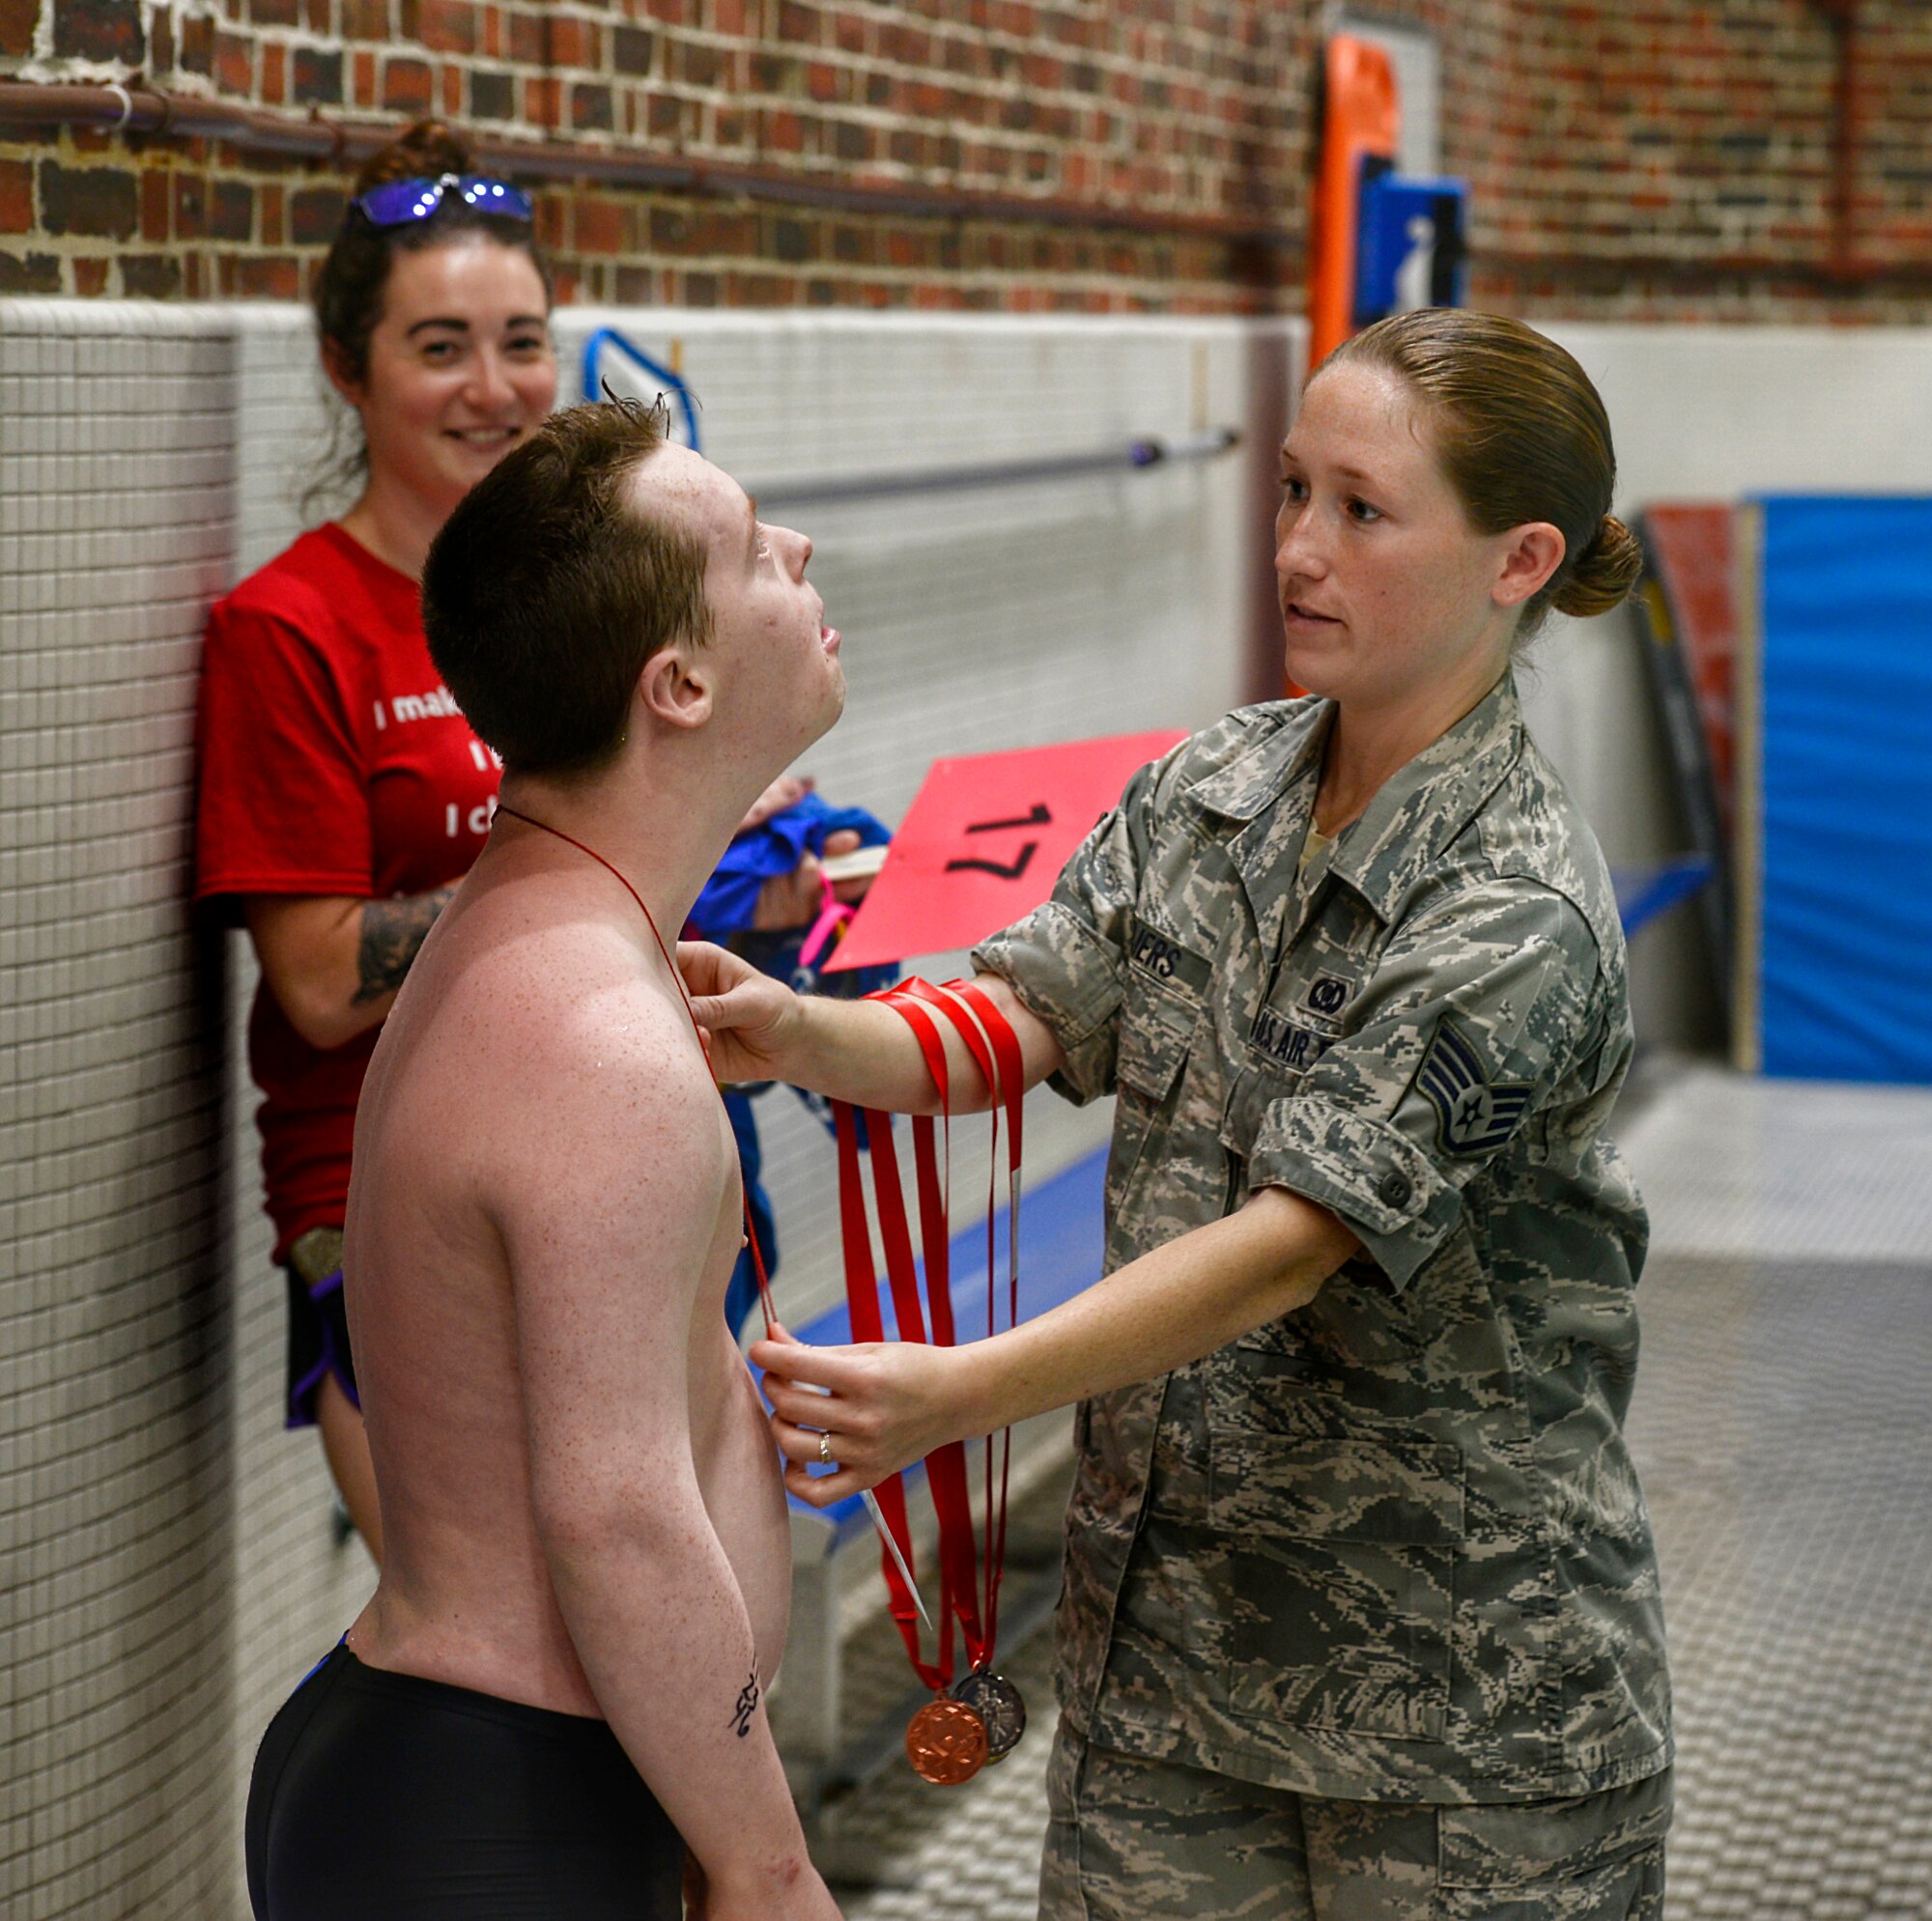 Staff Sgt. Beverly C. Meijers presents her brother, Simon Cole, with an award for his participation in the 25 meter swimming event during the Summer 2018 N.H. Special Olympics on June 1, 2018 at the University of New Hampshire Swasey pool in Durham, N.H. Meijers, a 157th Air Refueling Wing command post controller, volunteered to support the Special Olympics as a way to support her brother and her community. (N.H. Air National Guard photo by Staff Sgt. Kayla White)